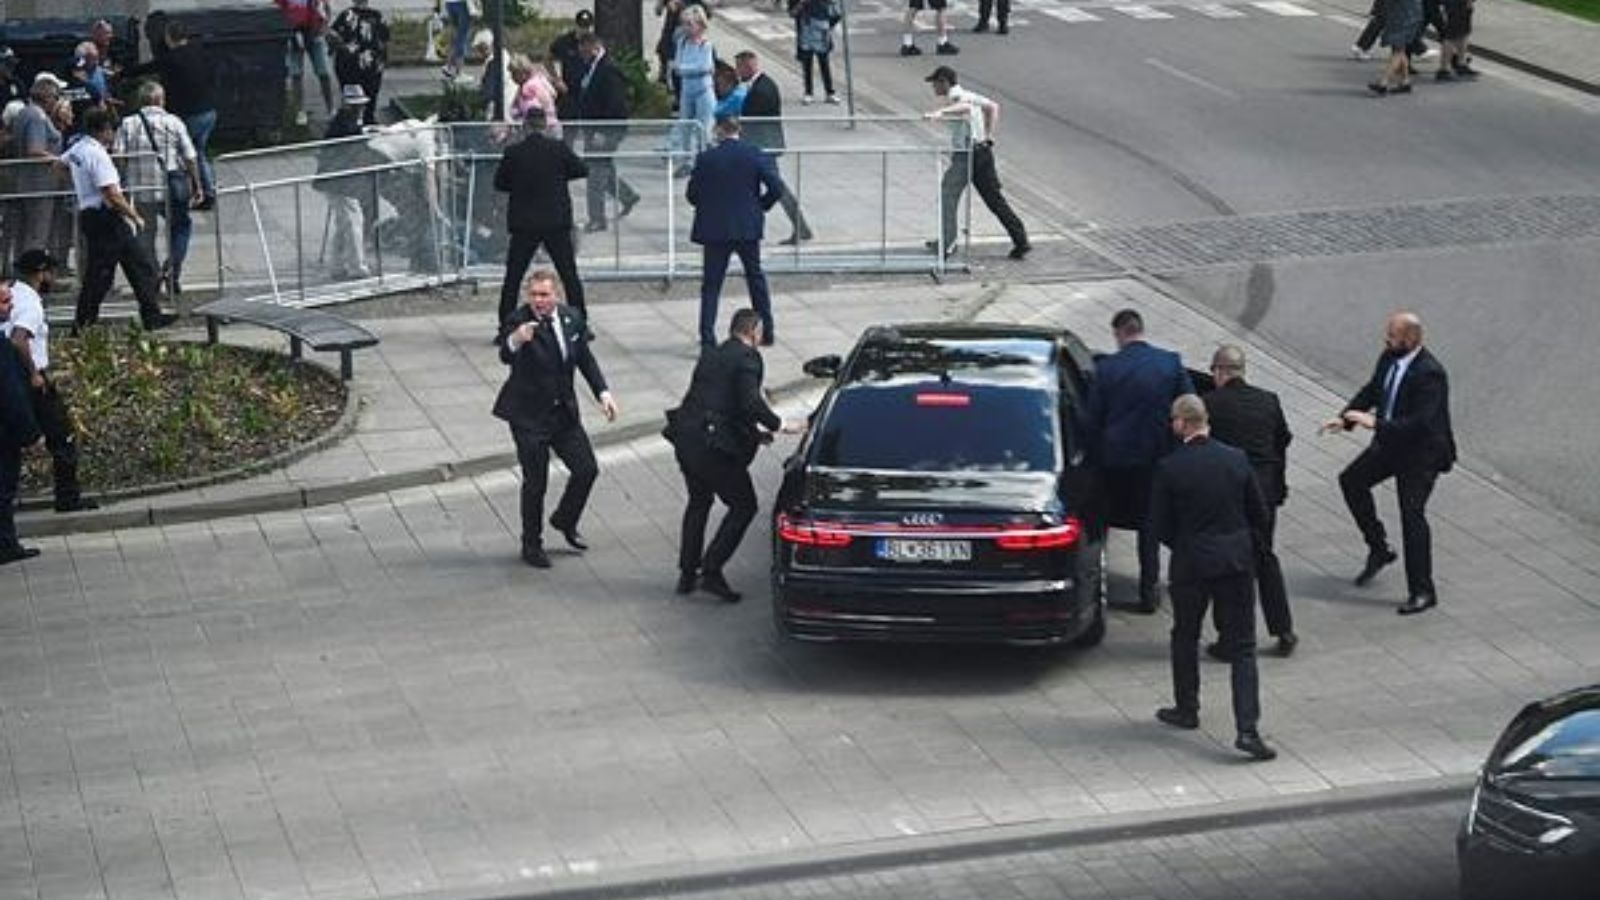 Slovak PM Robert Fico in ‘life-threatening condition’ after  shooting: Report | World News - The Indian Express